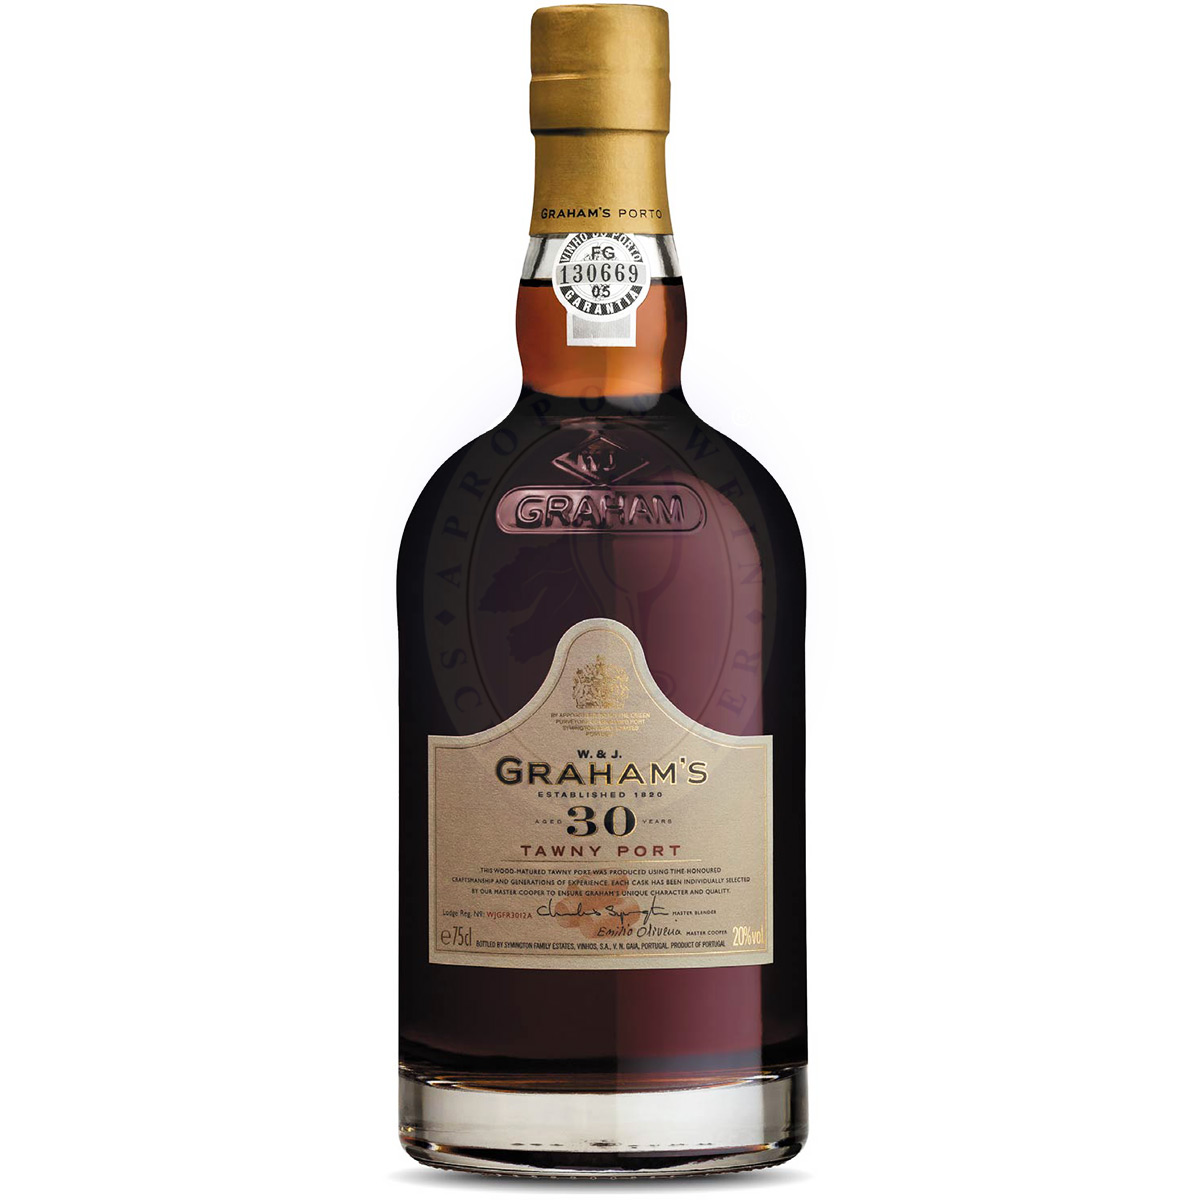 Tawny 30 Years Old Graham's 0,75l